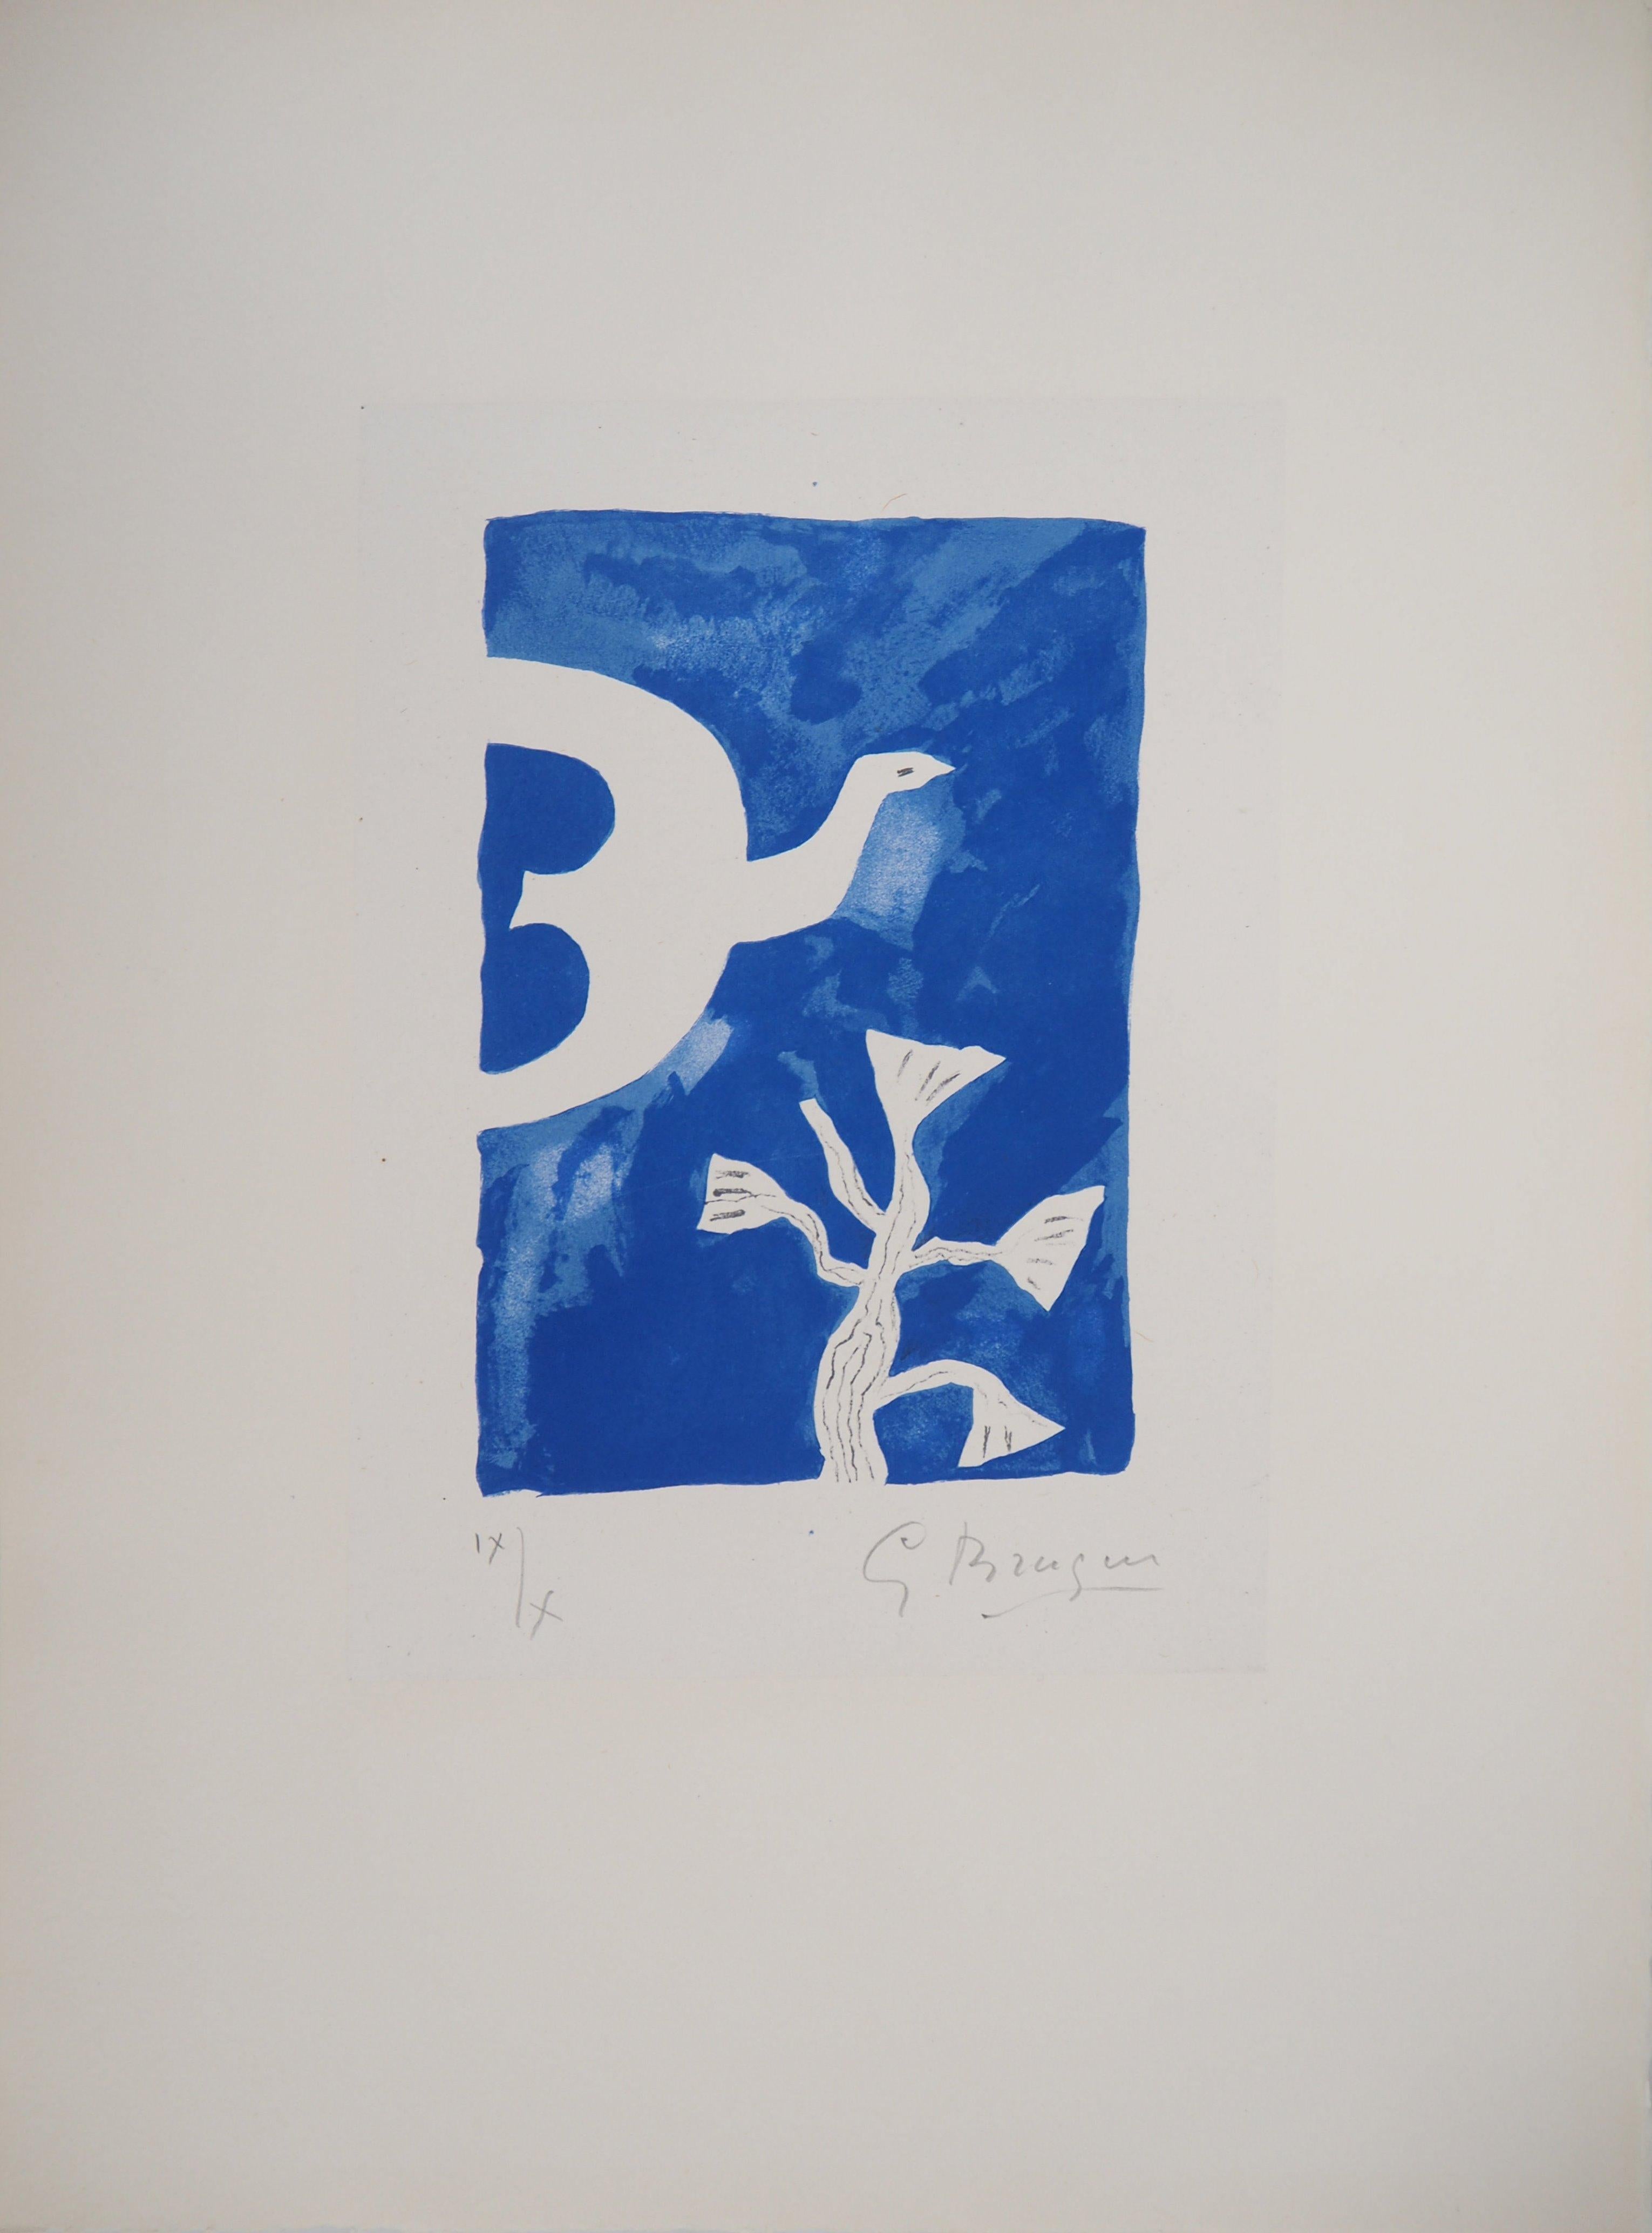 Bird and Lotus - Original lithograph, Handsigned, Ltd / 10 - Mourlot #92) - Print by Georges Braque